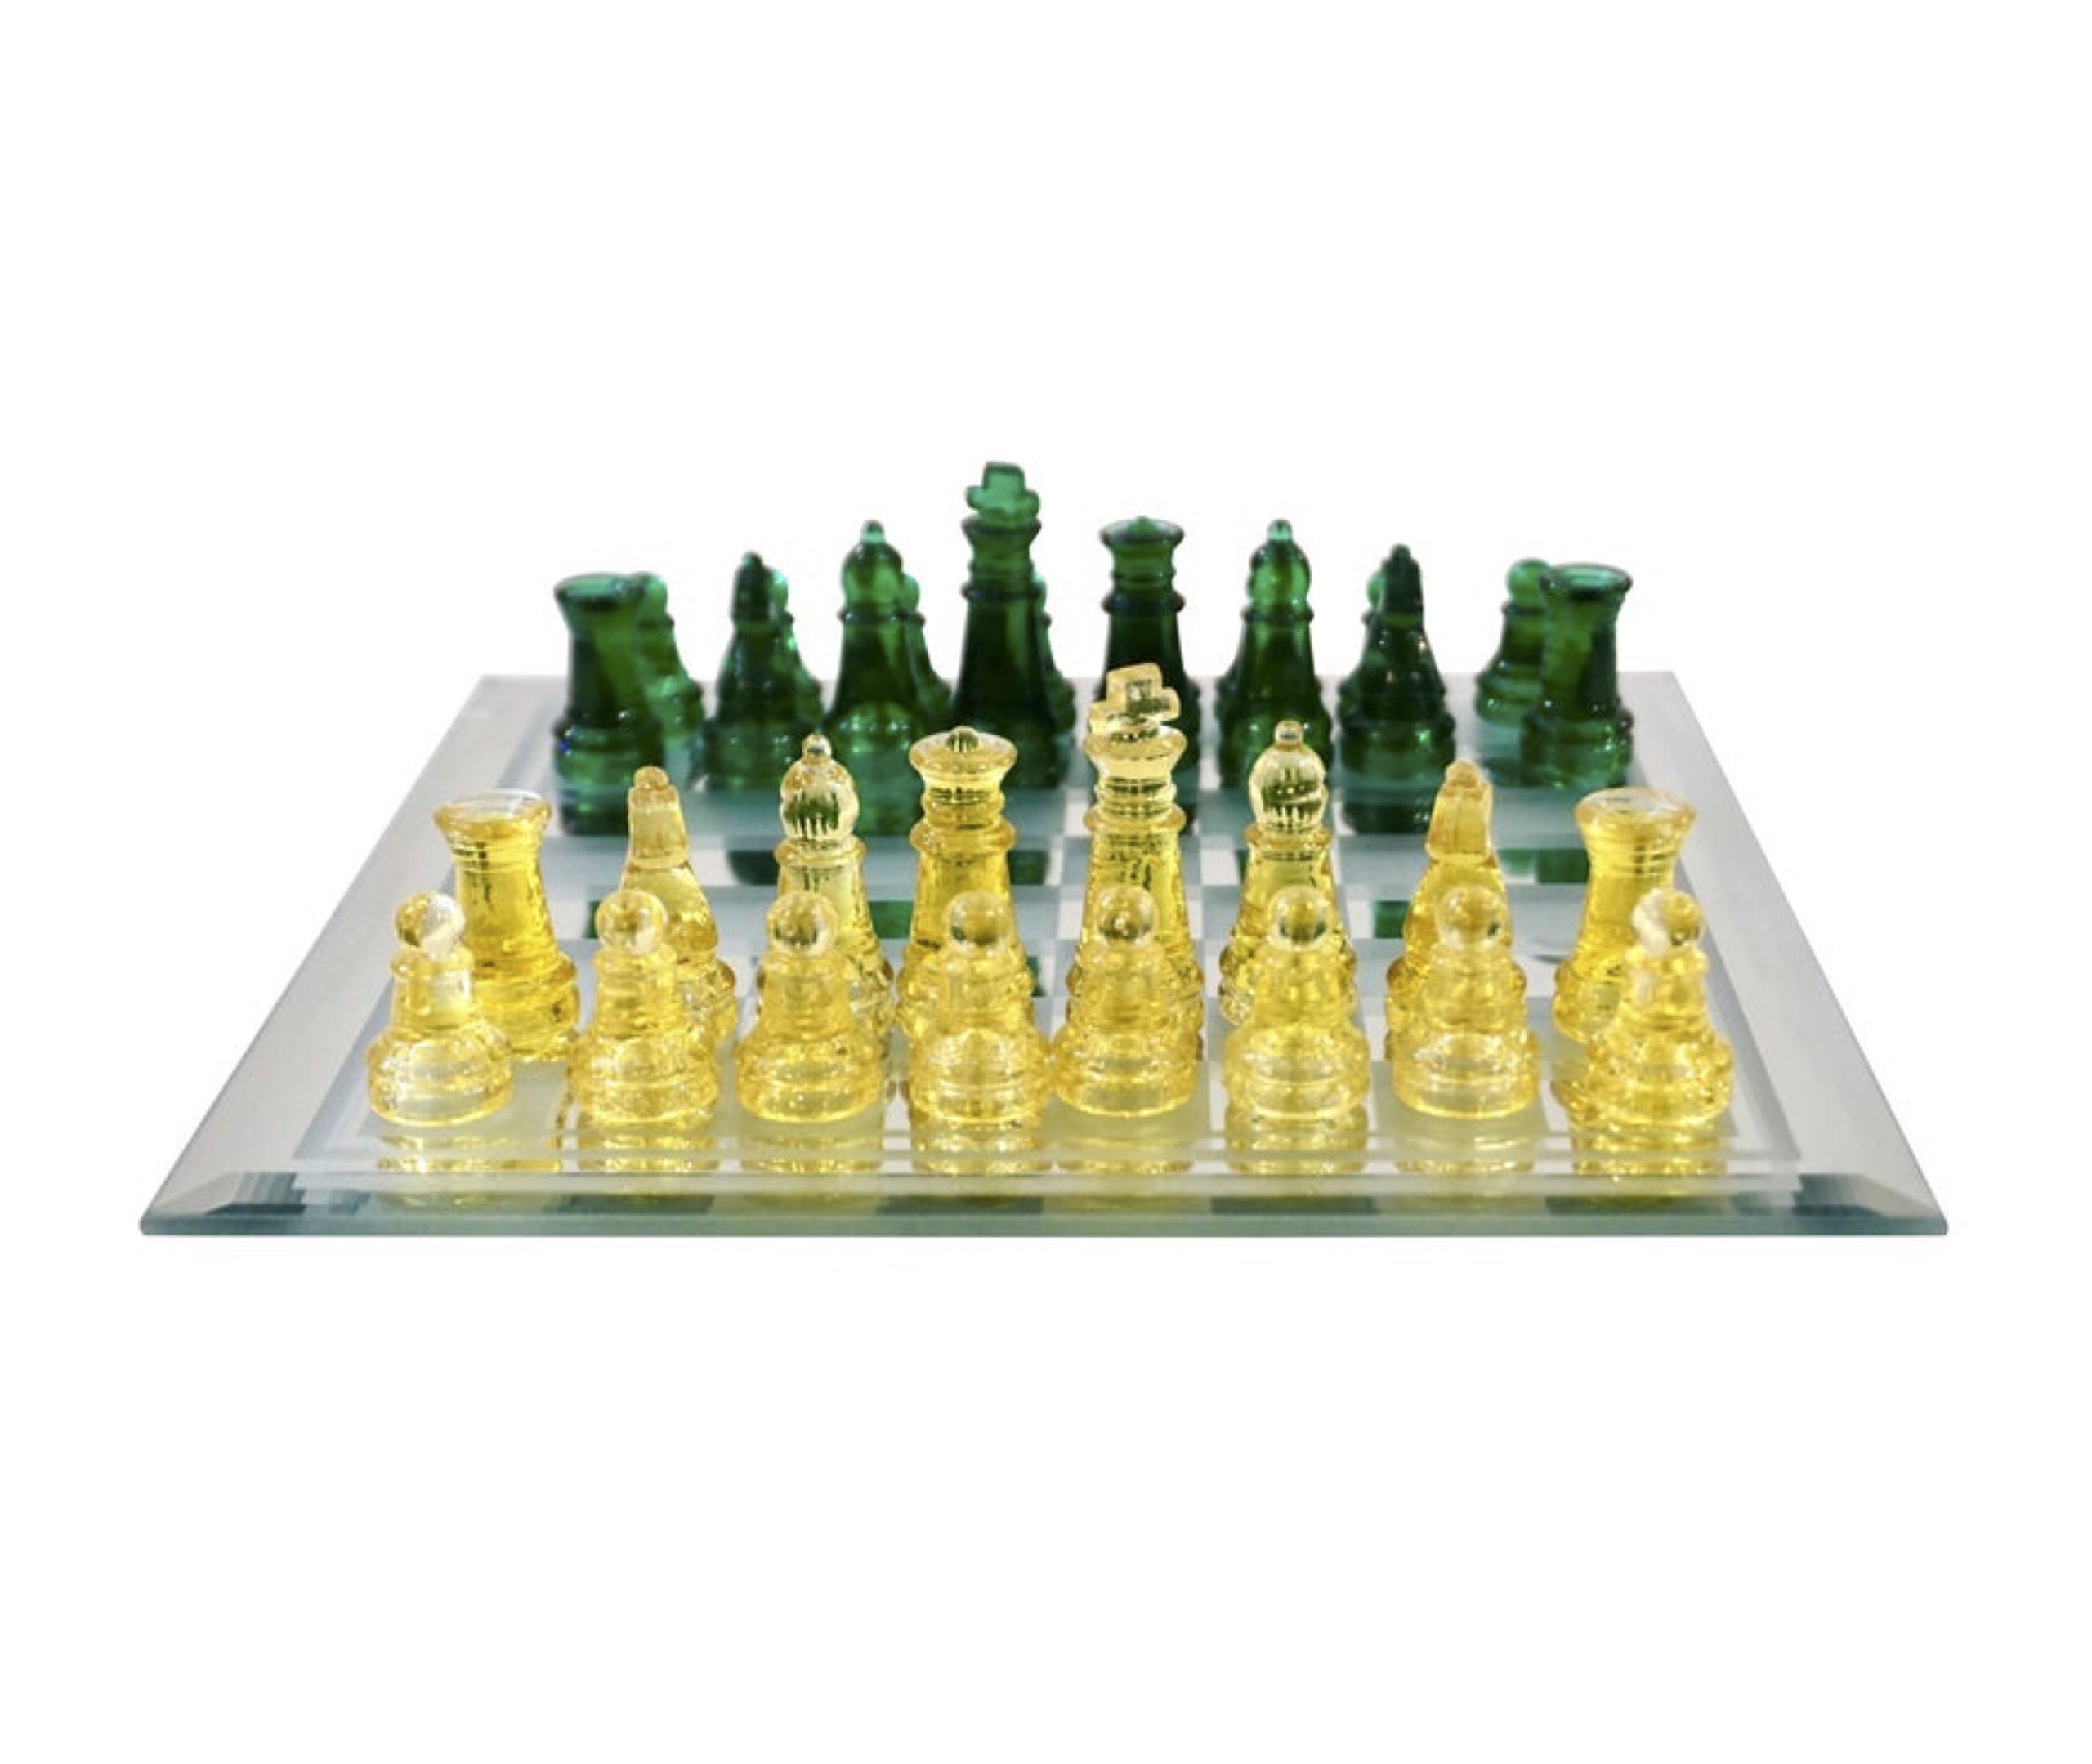 cosulich_interiors_and_antiques_products_new_york_design_contemporary_minimalist_green_yellow_murano_glass_chess_set_mirrored_board-scaled-1